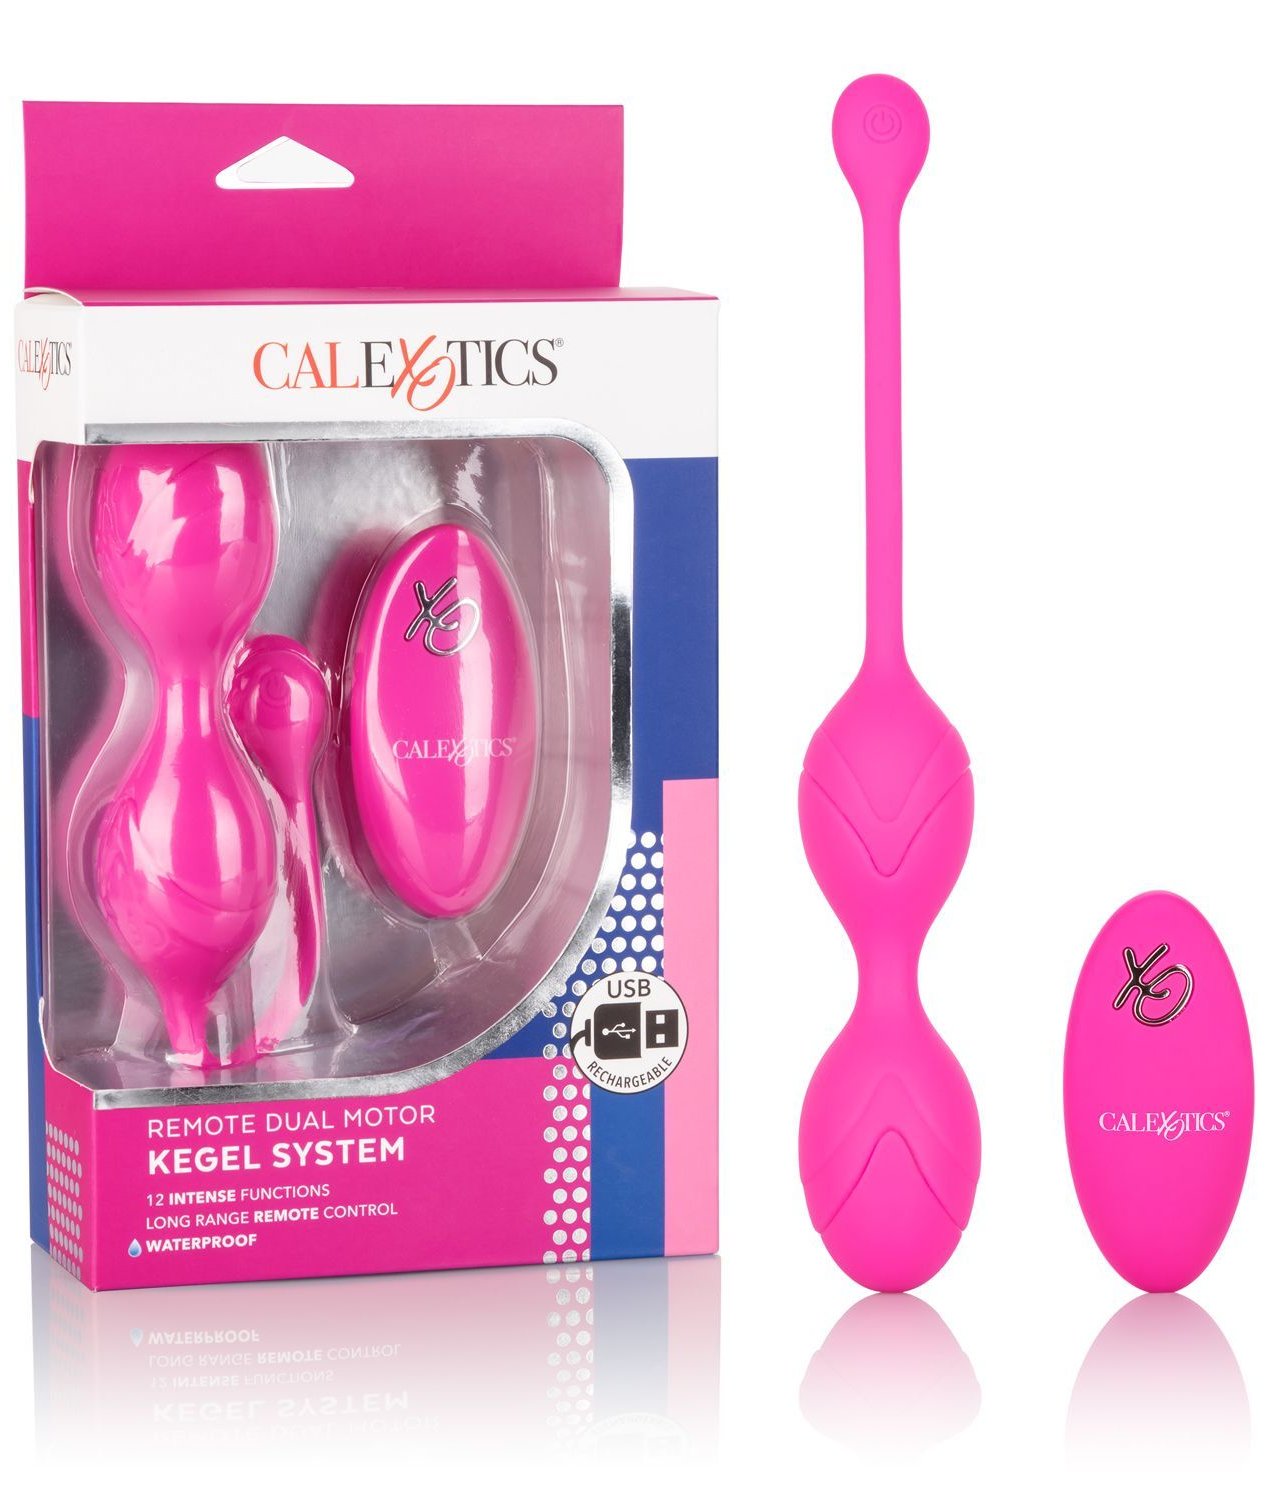 Lock-n-play Remote Dual Motor Kegel System by CalExotics with the box